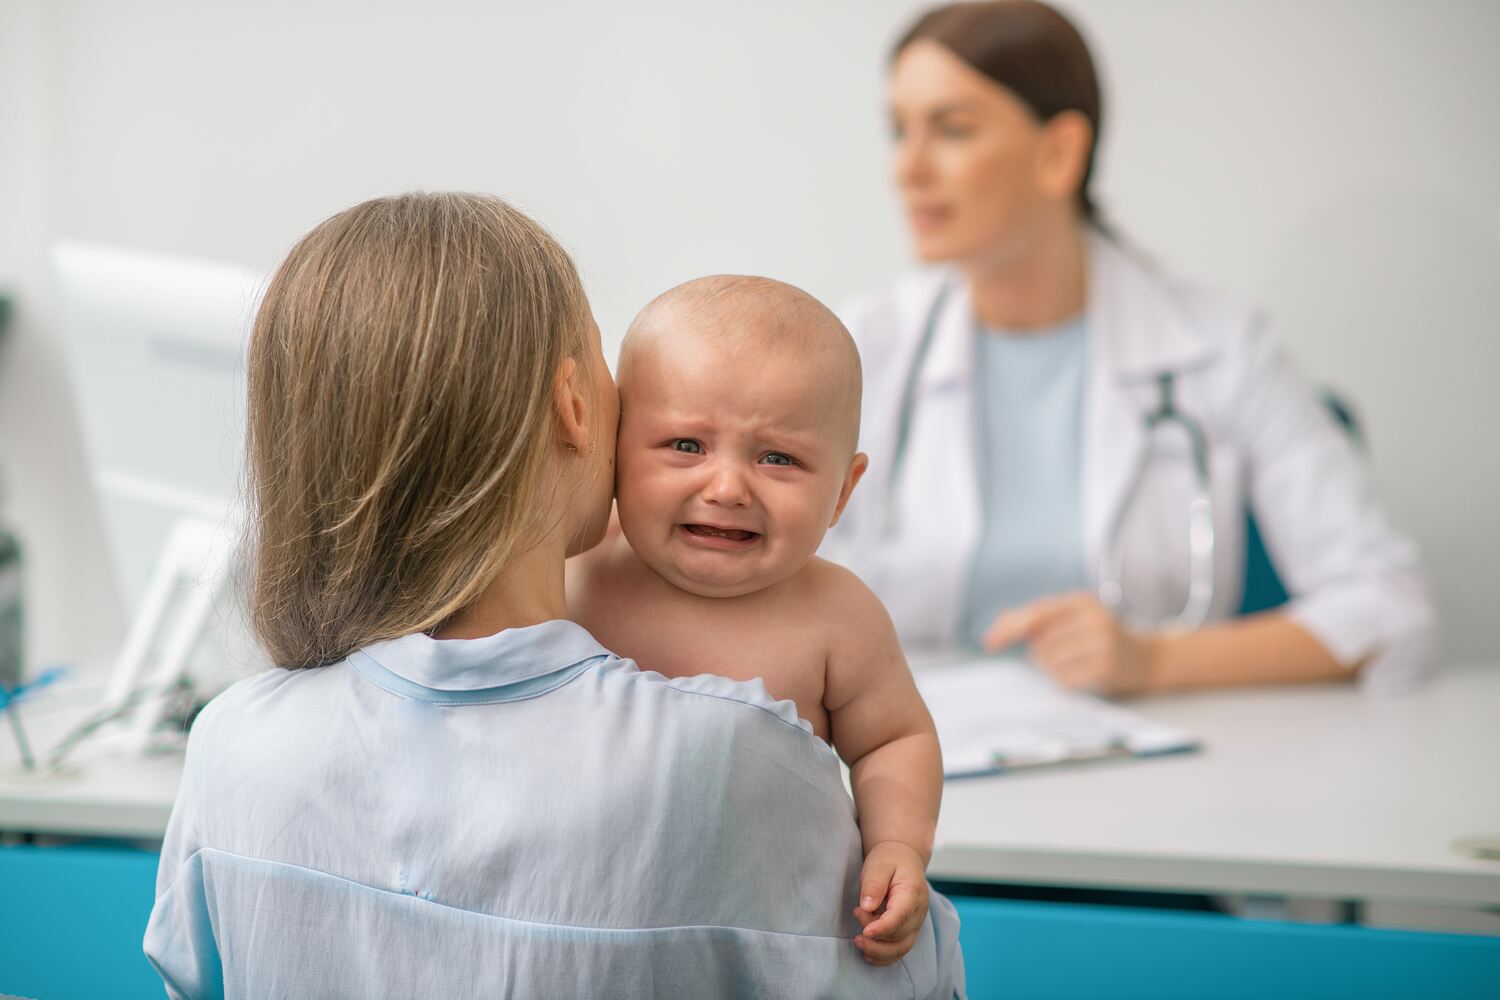 Consulting doctor for baby spitting mucus